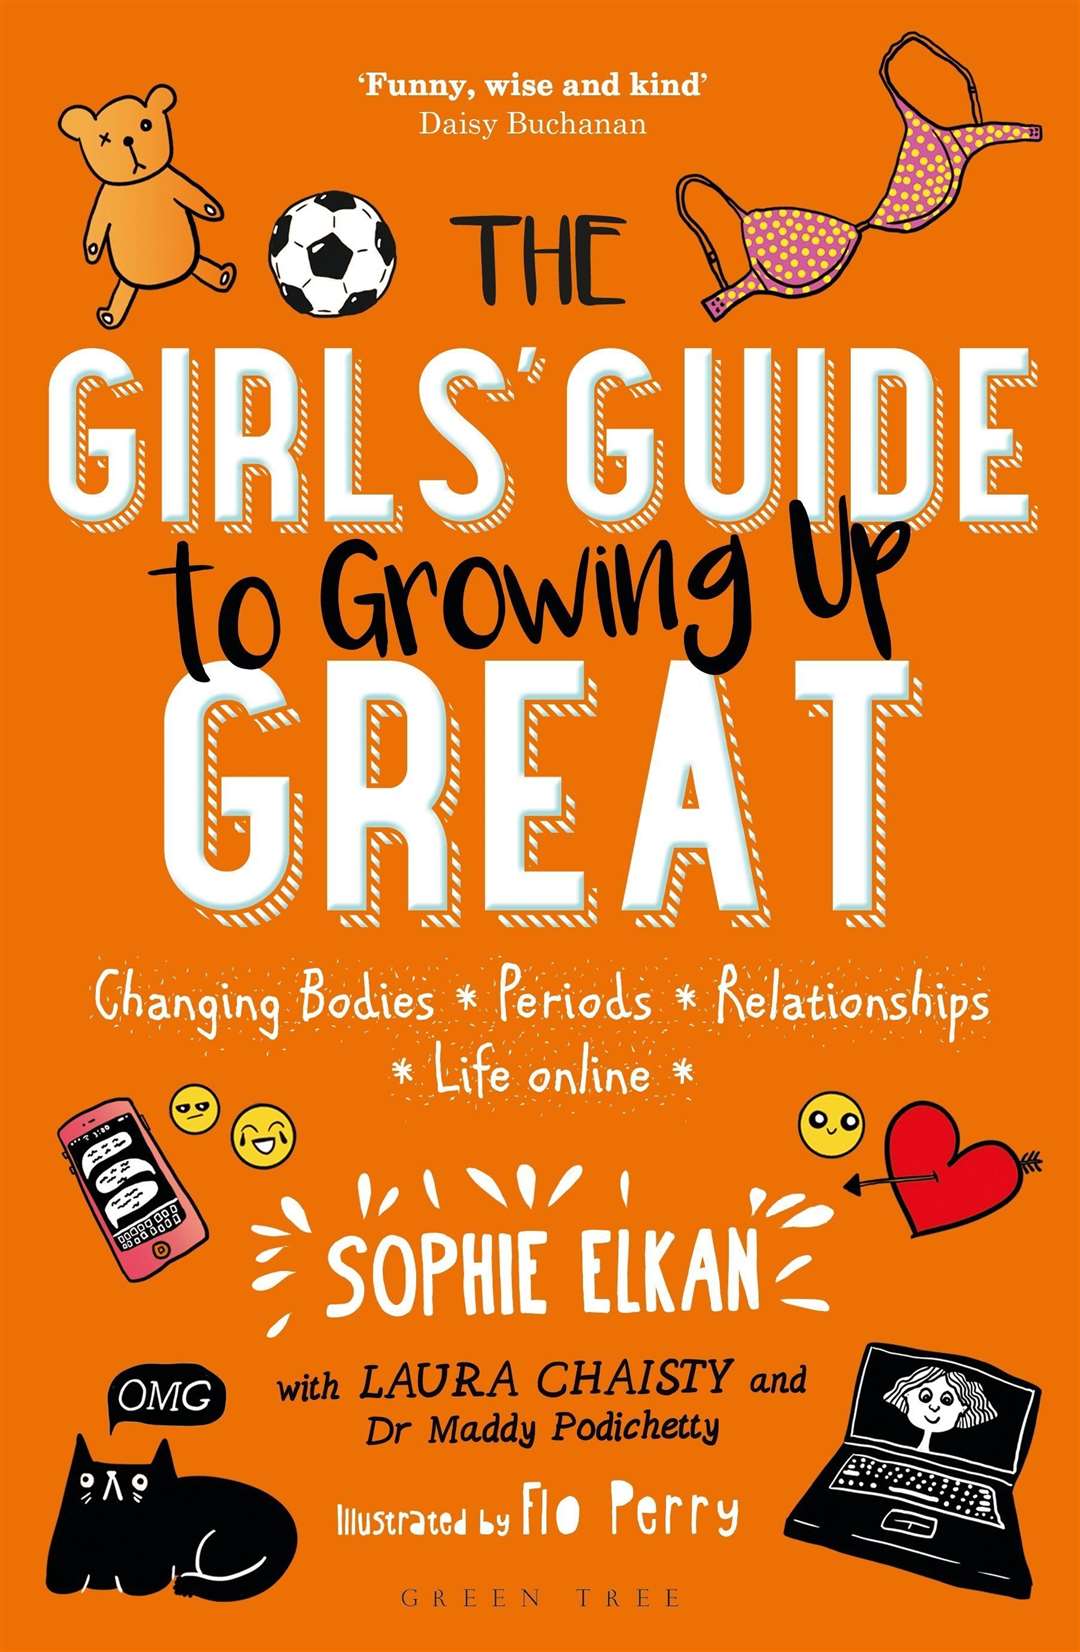 The Girls' Guide To Growing Up Great by Sophie Elkan, Laura Chaisty and Dr Maddy Podichetty, is published by Green Tree, priced £12.99. Available now.